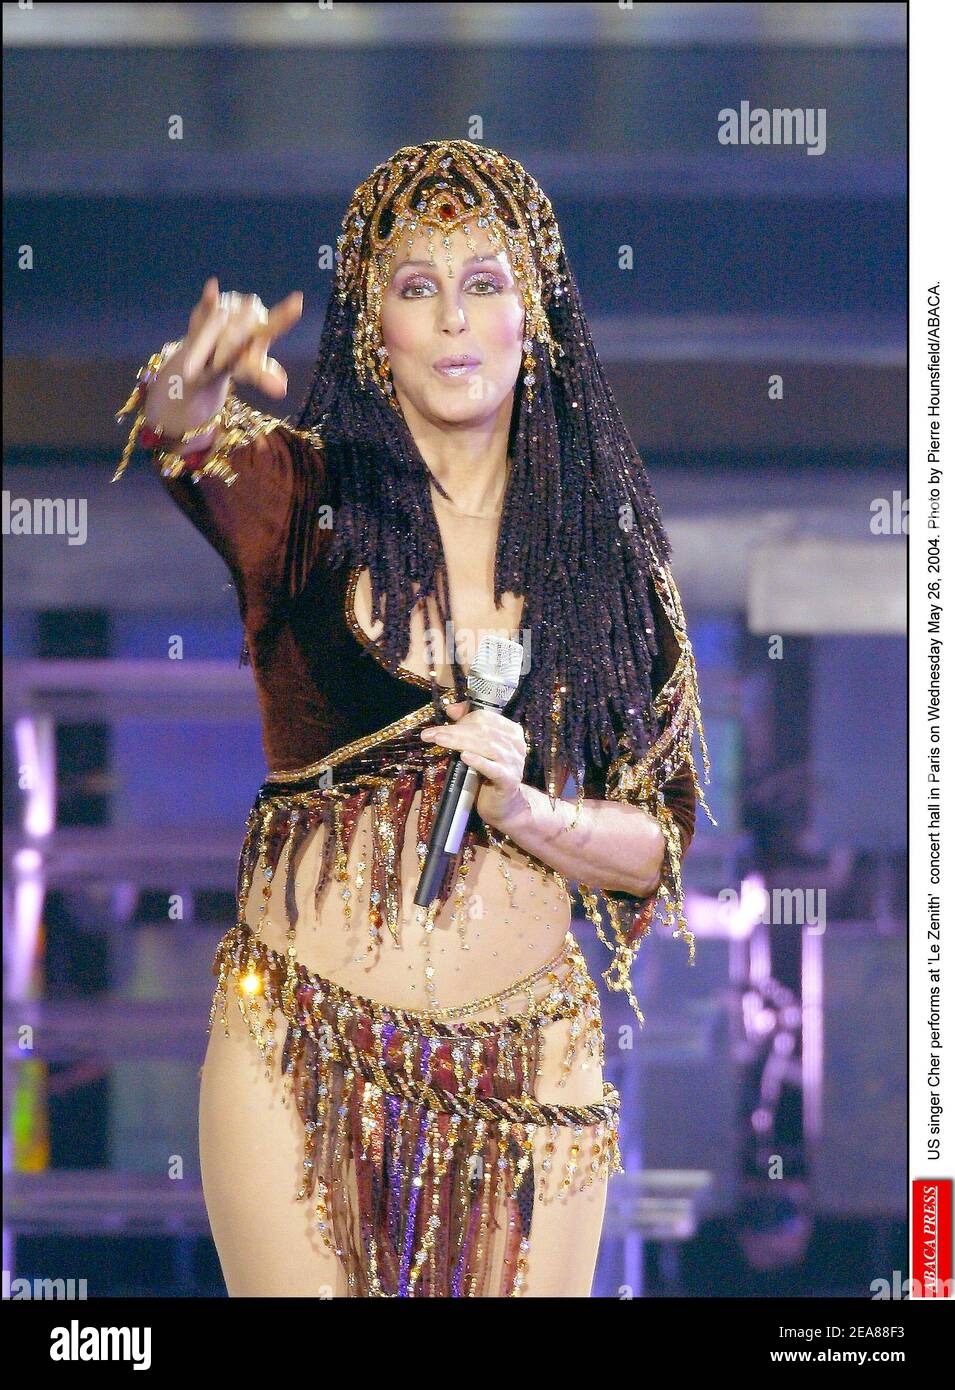 US singer Cher performs at 'Le Zenith' concert hall in Paris on Wednesday May 26, 2004. Photo by Pierre Hounsfield/ABACA. Stock Photo